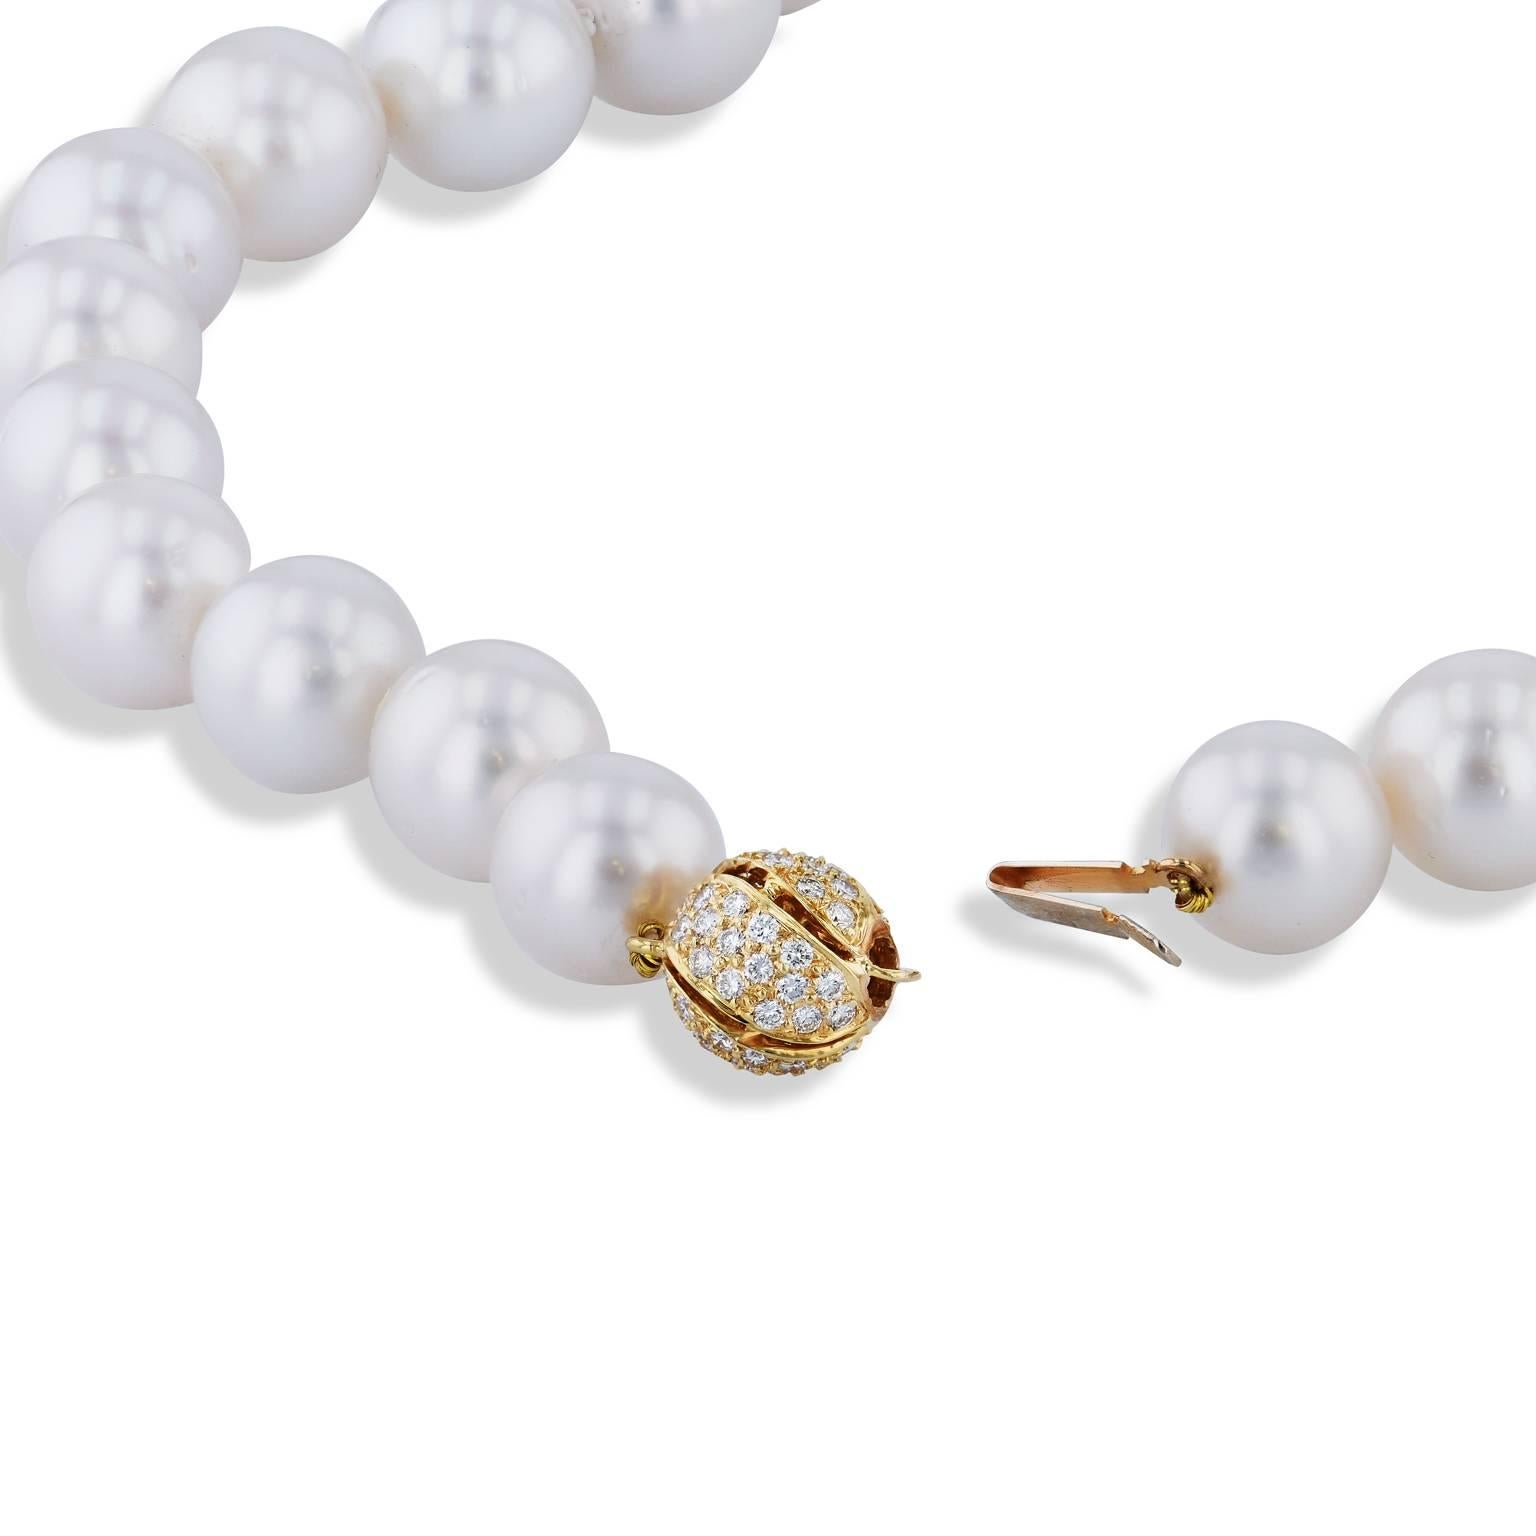 Thirty-one South Sea pearls, measuring 11.0 – 14.5 millimeters, are strung together to create a spectacular necklace. 0.75 carat of pave-set diamond (G/H/VS/SI) on 18 karat yellow gold clasp visually elevate the impact of this special piece. With